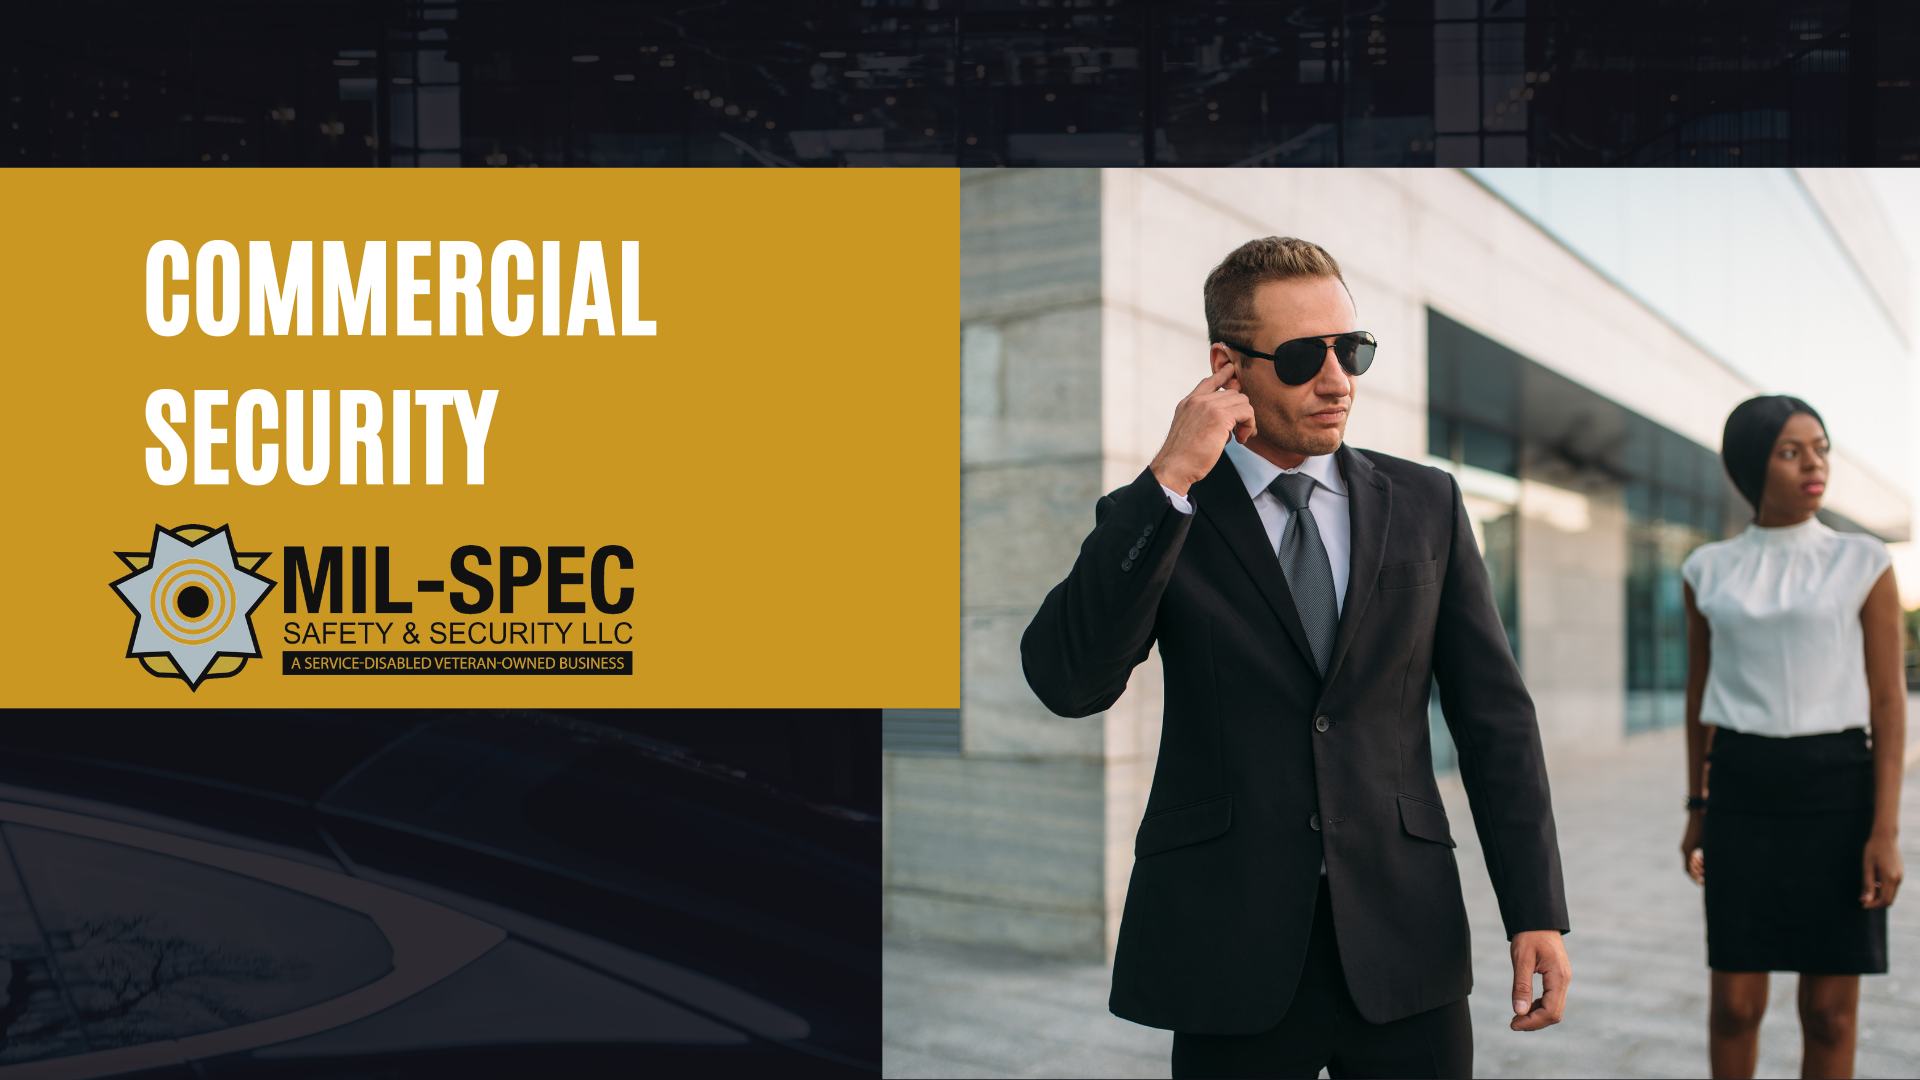 Mil-Spec Safety and Security logo - Experts in Commercial Security services for safeguarding businesses